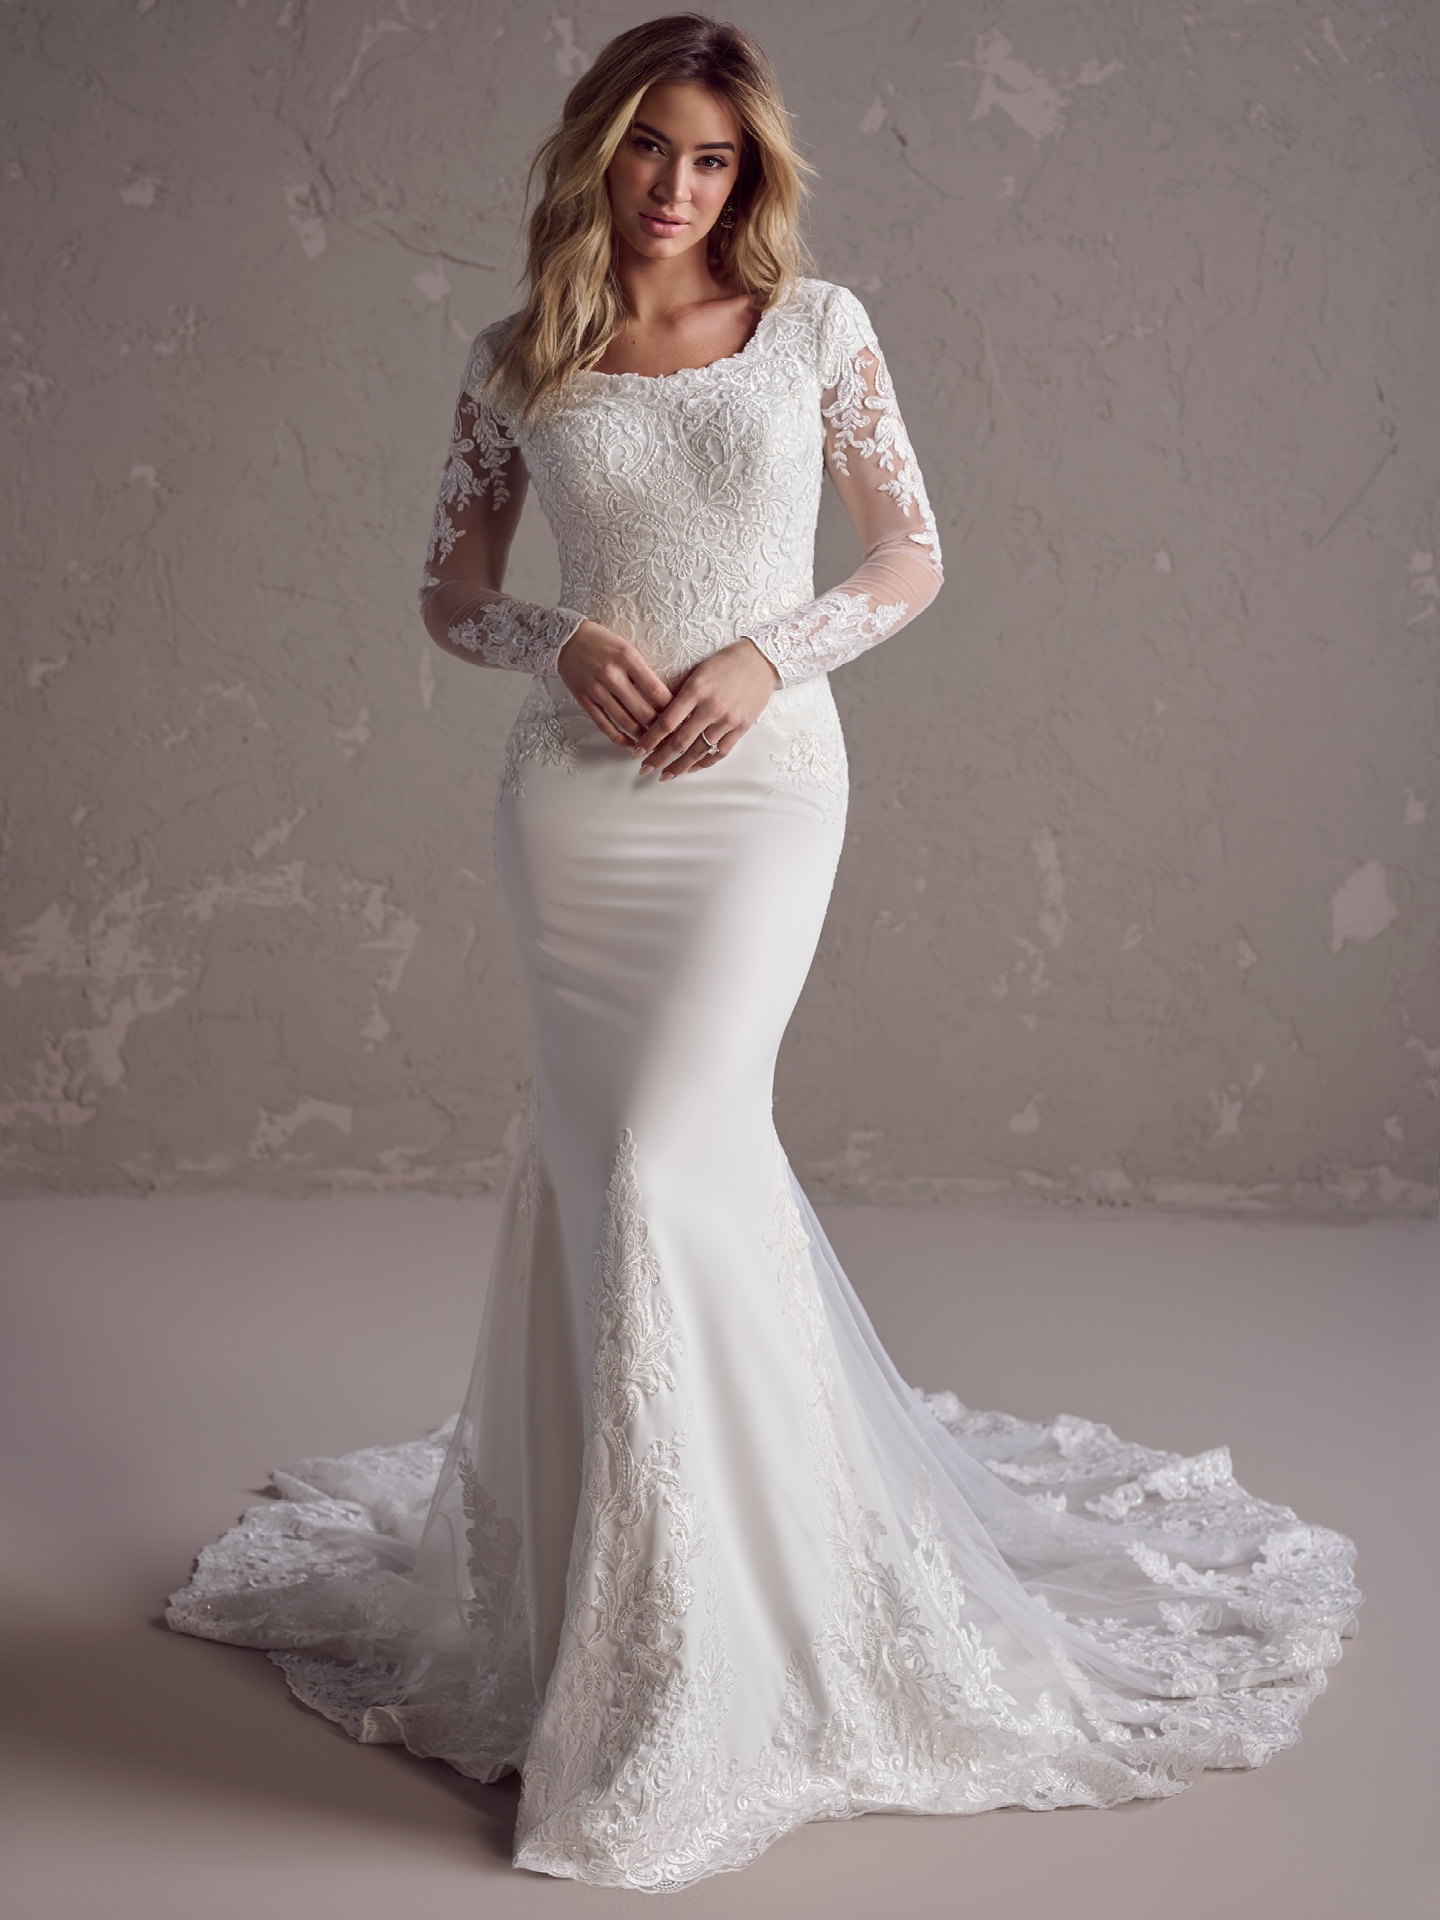 White Mermaid Wedding Dress Sleeves With Beaded Lace Applique Elegant  Bridal Gown For Nigerian And Arabic Marriage From Fittedbridal, $247.24 |  DHgate.Com